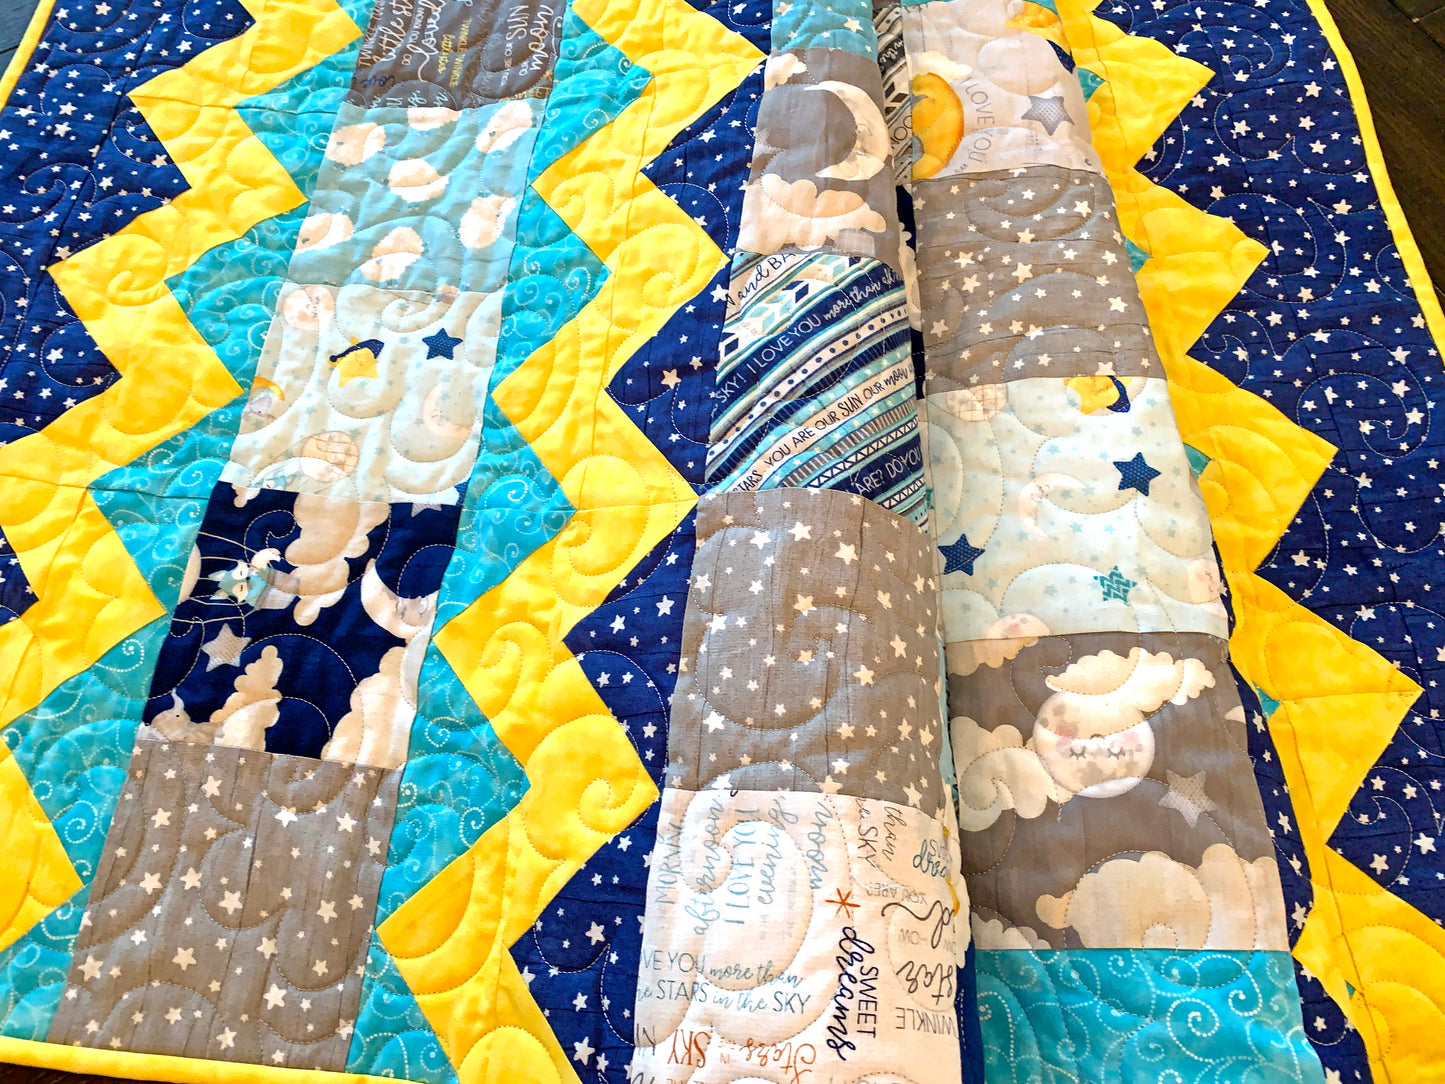 Close up of quilting on colorful charm square baby quilt pattern with yellow top and bottom zig-zag rows that look like rick-rack with rows of patchwork squares in between. Quilt is trimmed in blue and yellow and yellow.